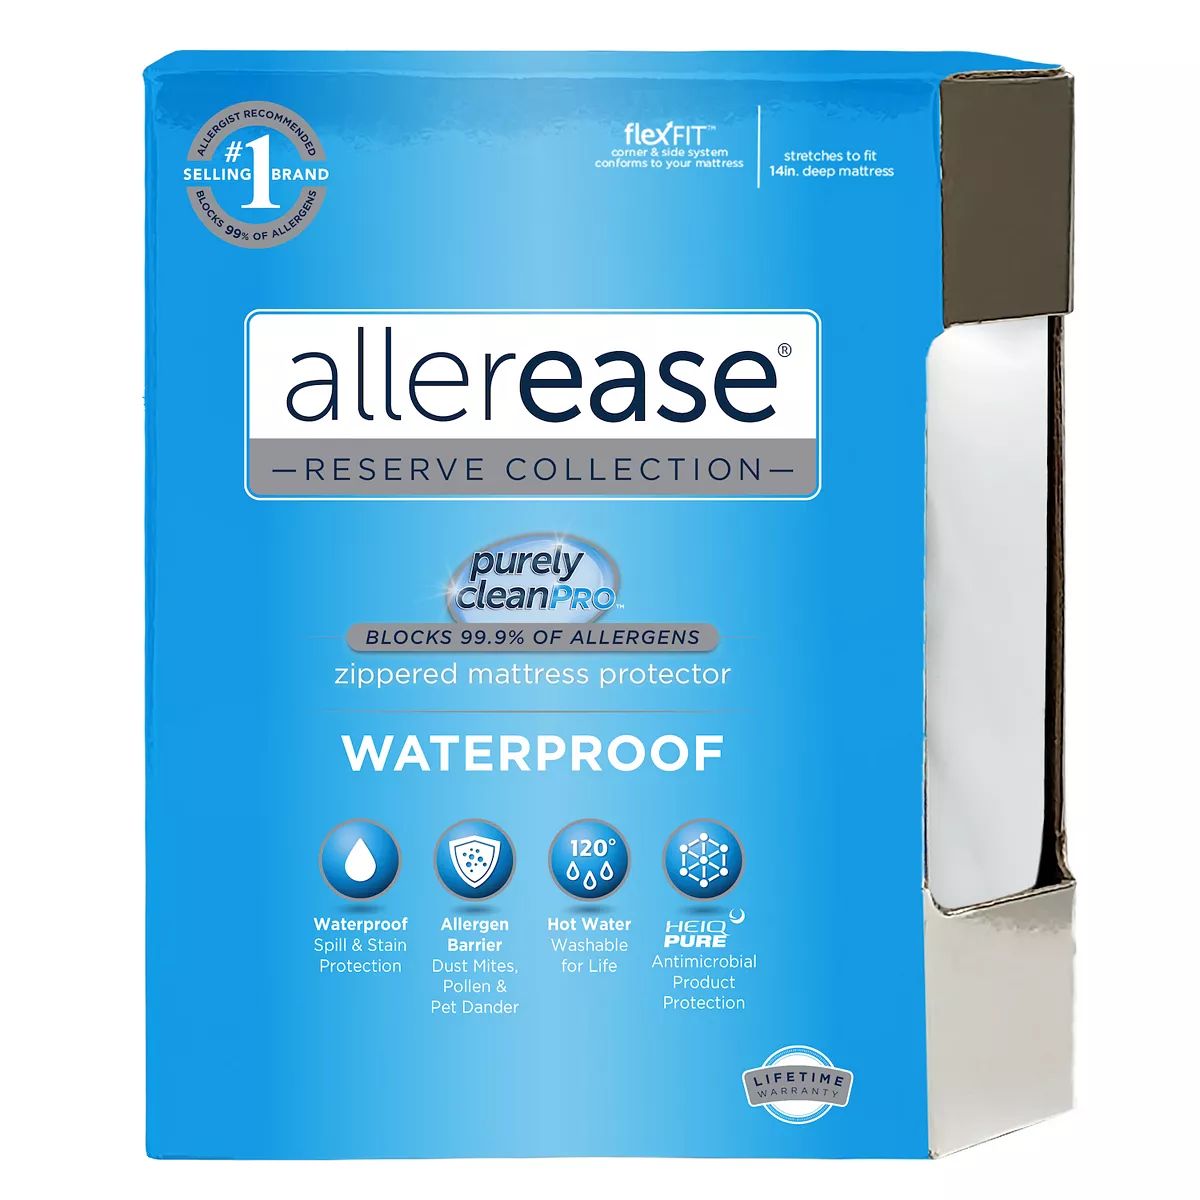 Allerease Waterproof Allergy Protection Mattress Protector | Kohl's